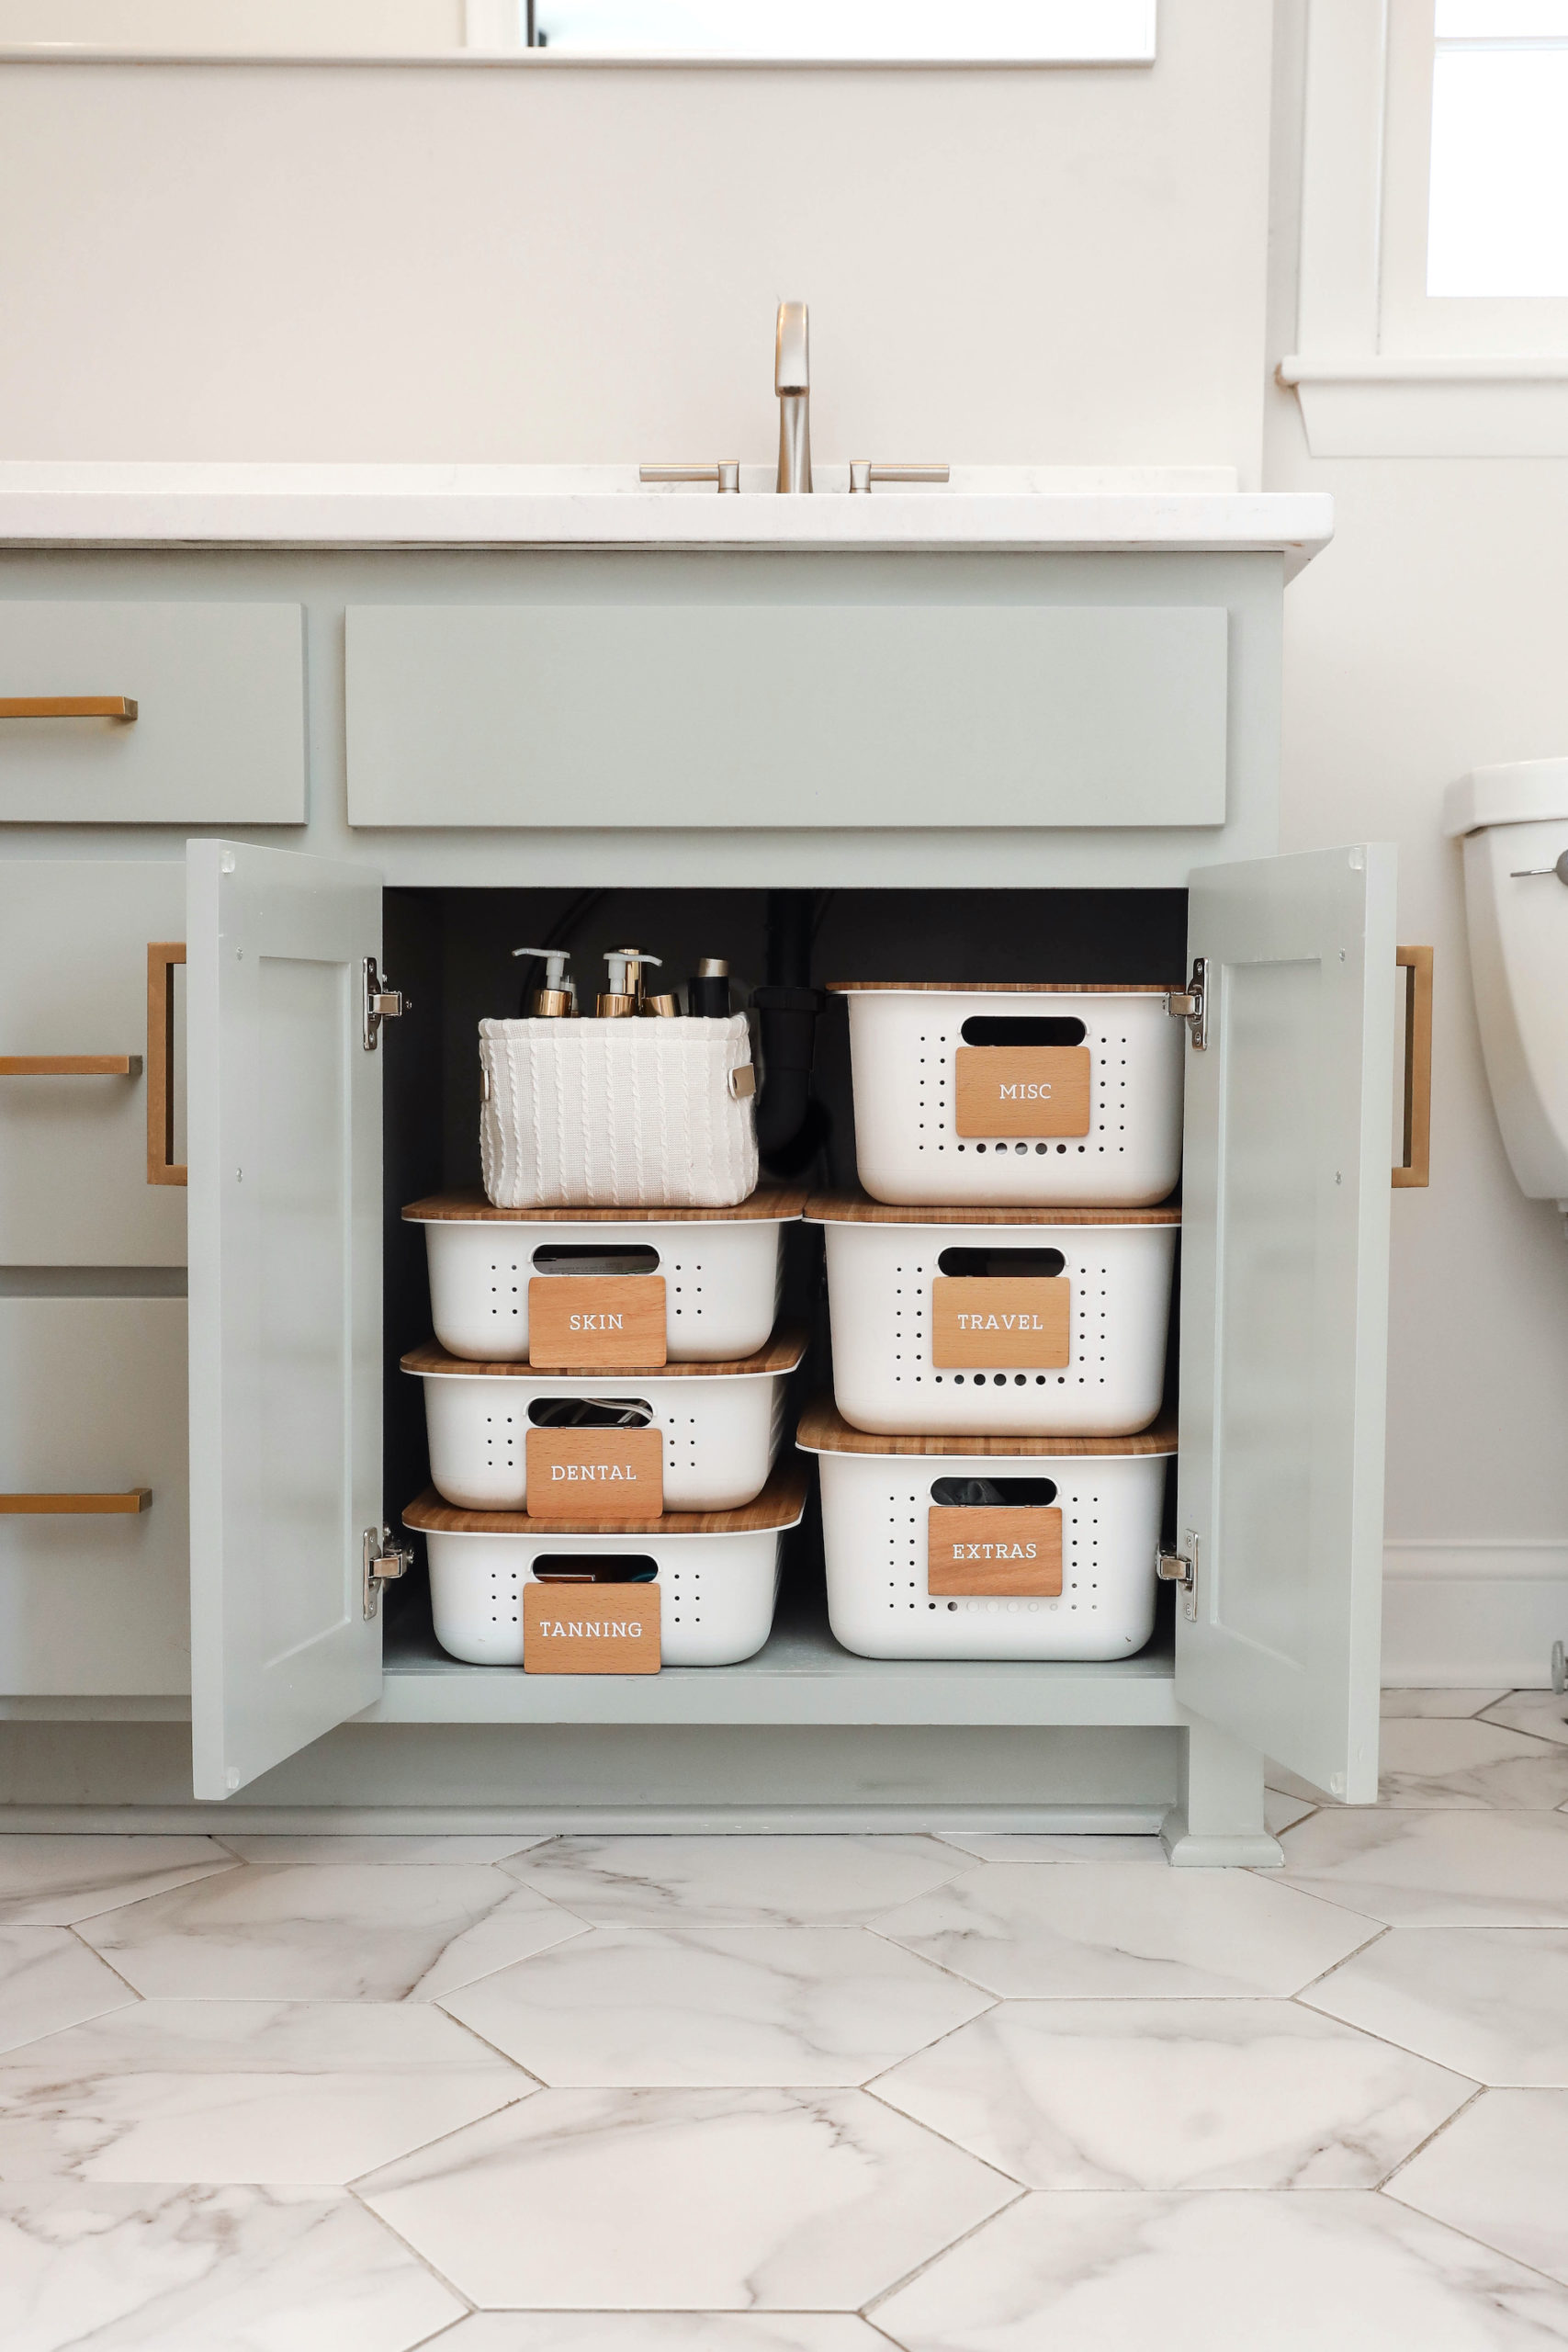 Refresh the Bathroom with : Bathroom Styling Essentials — LIVEN DESIGN